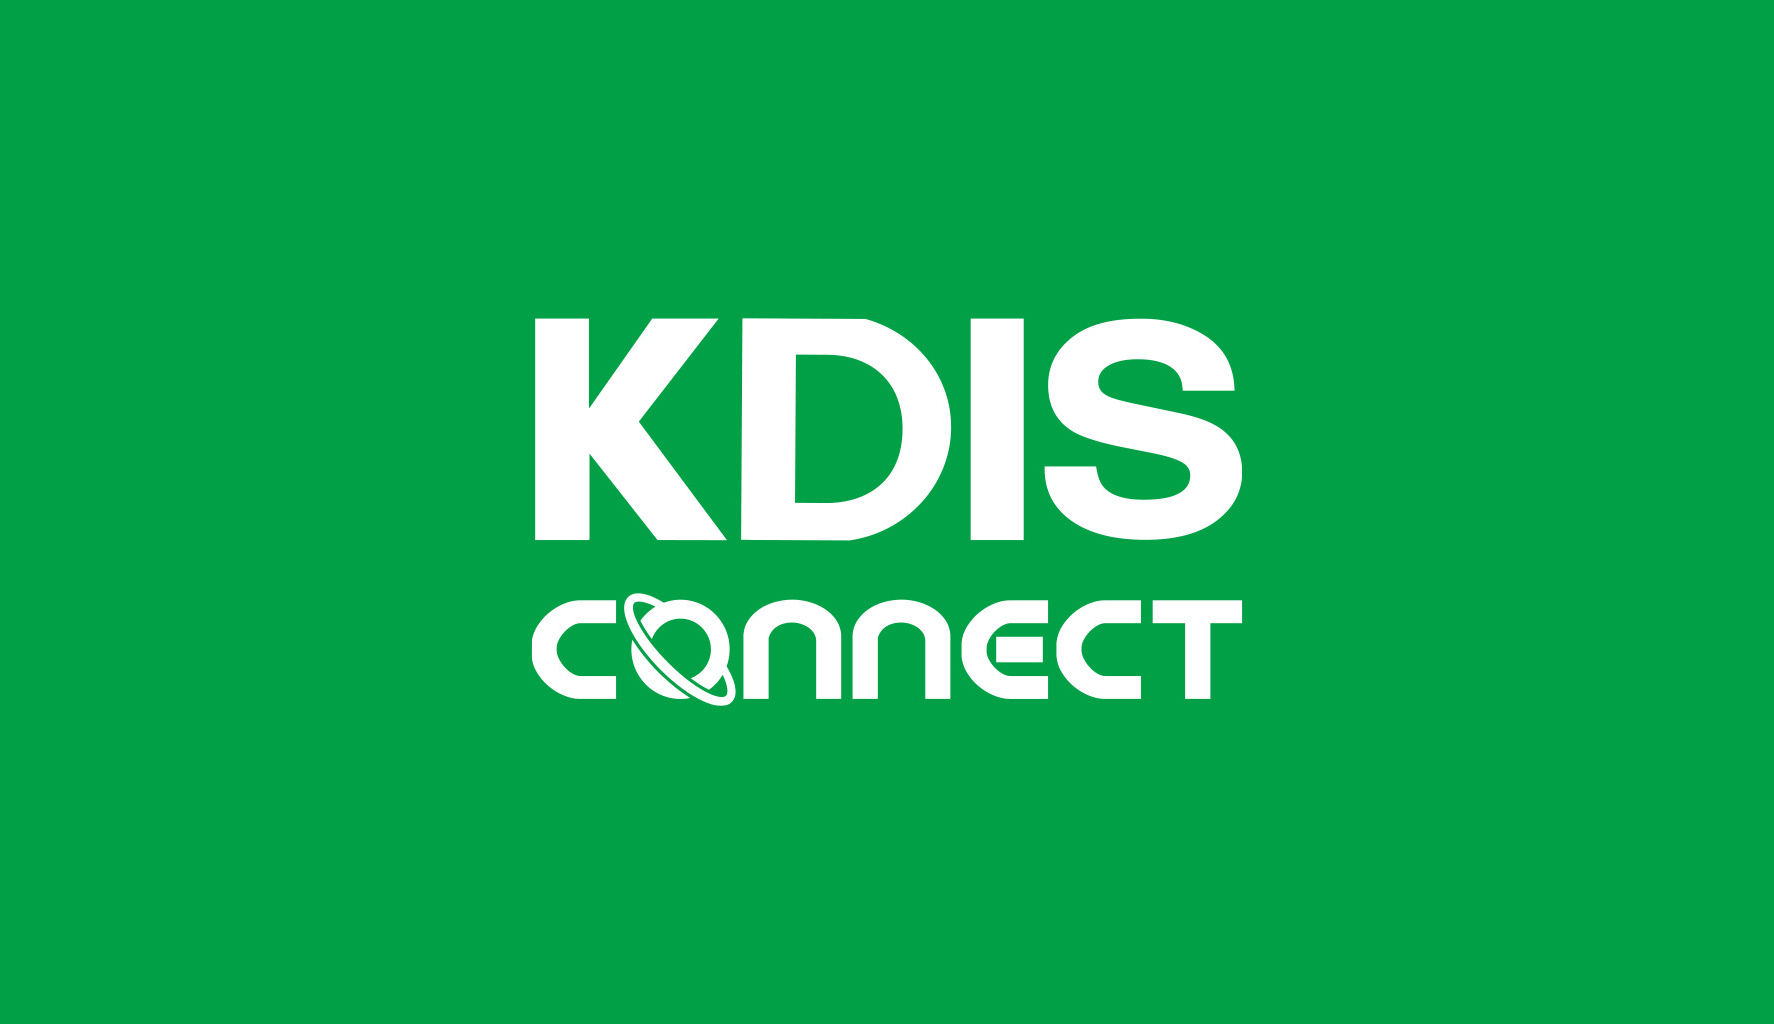 KDI School Launched a New Application: KDIS CONNECT